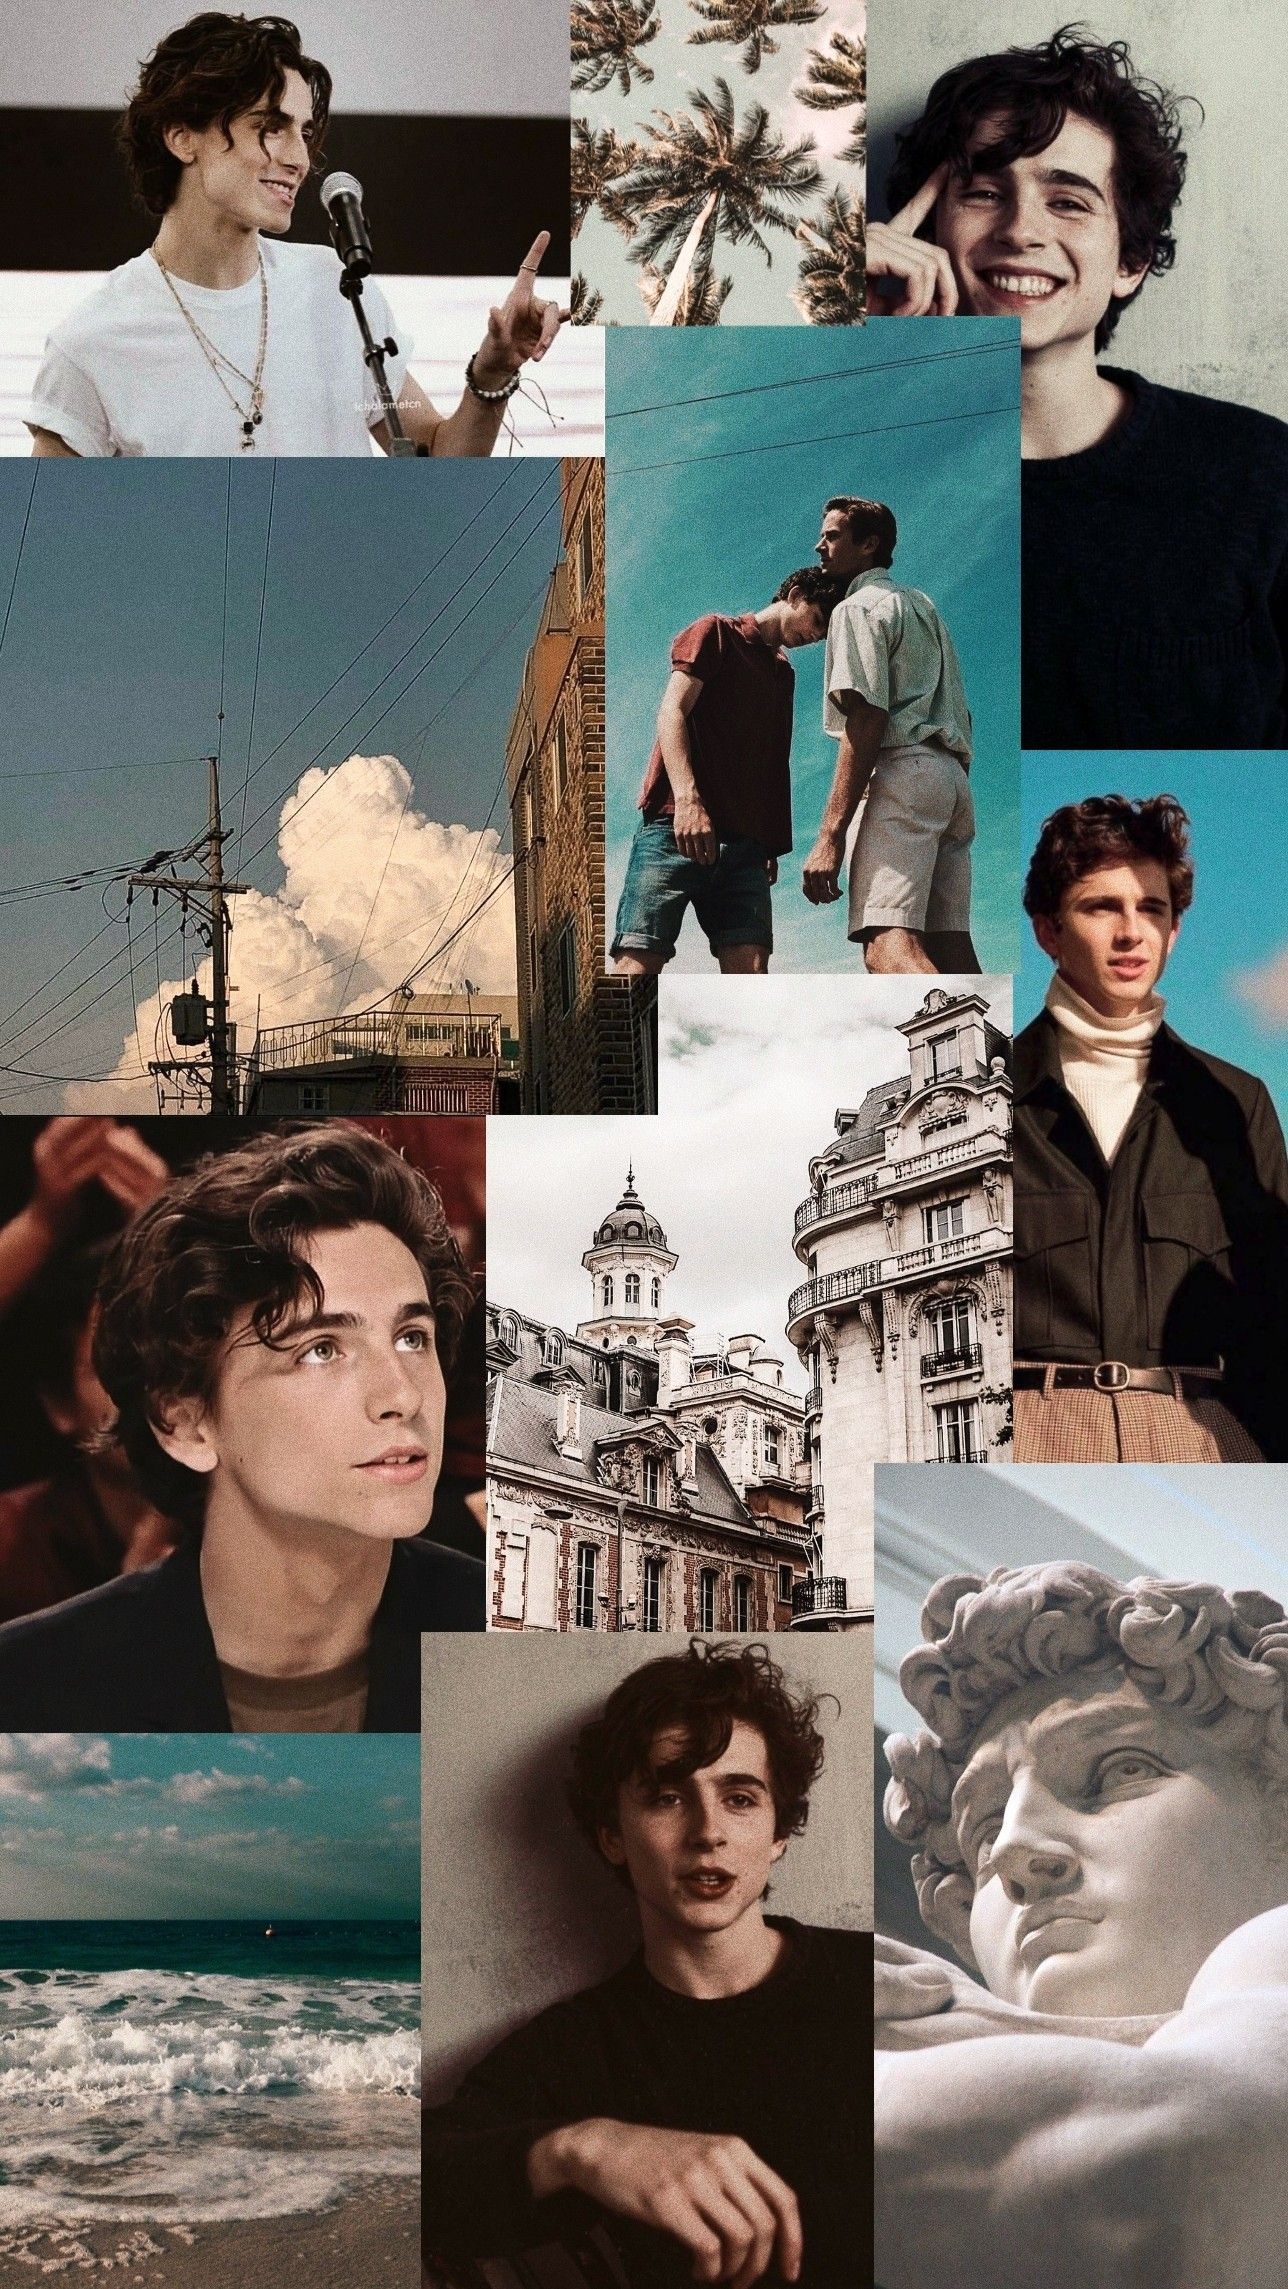 Collage of Timothee Chalamet photos for an aesthetic background - Timothee Chalamet